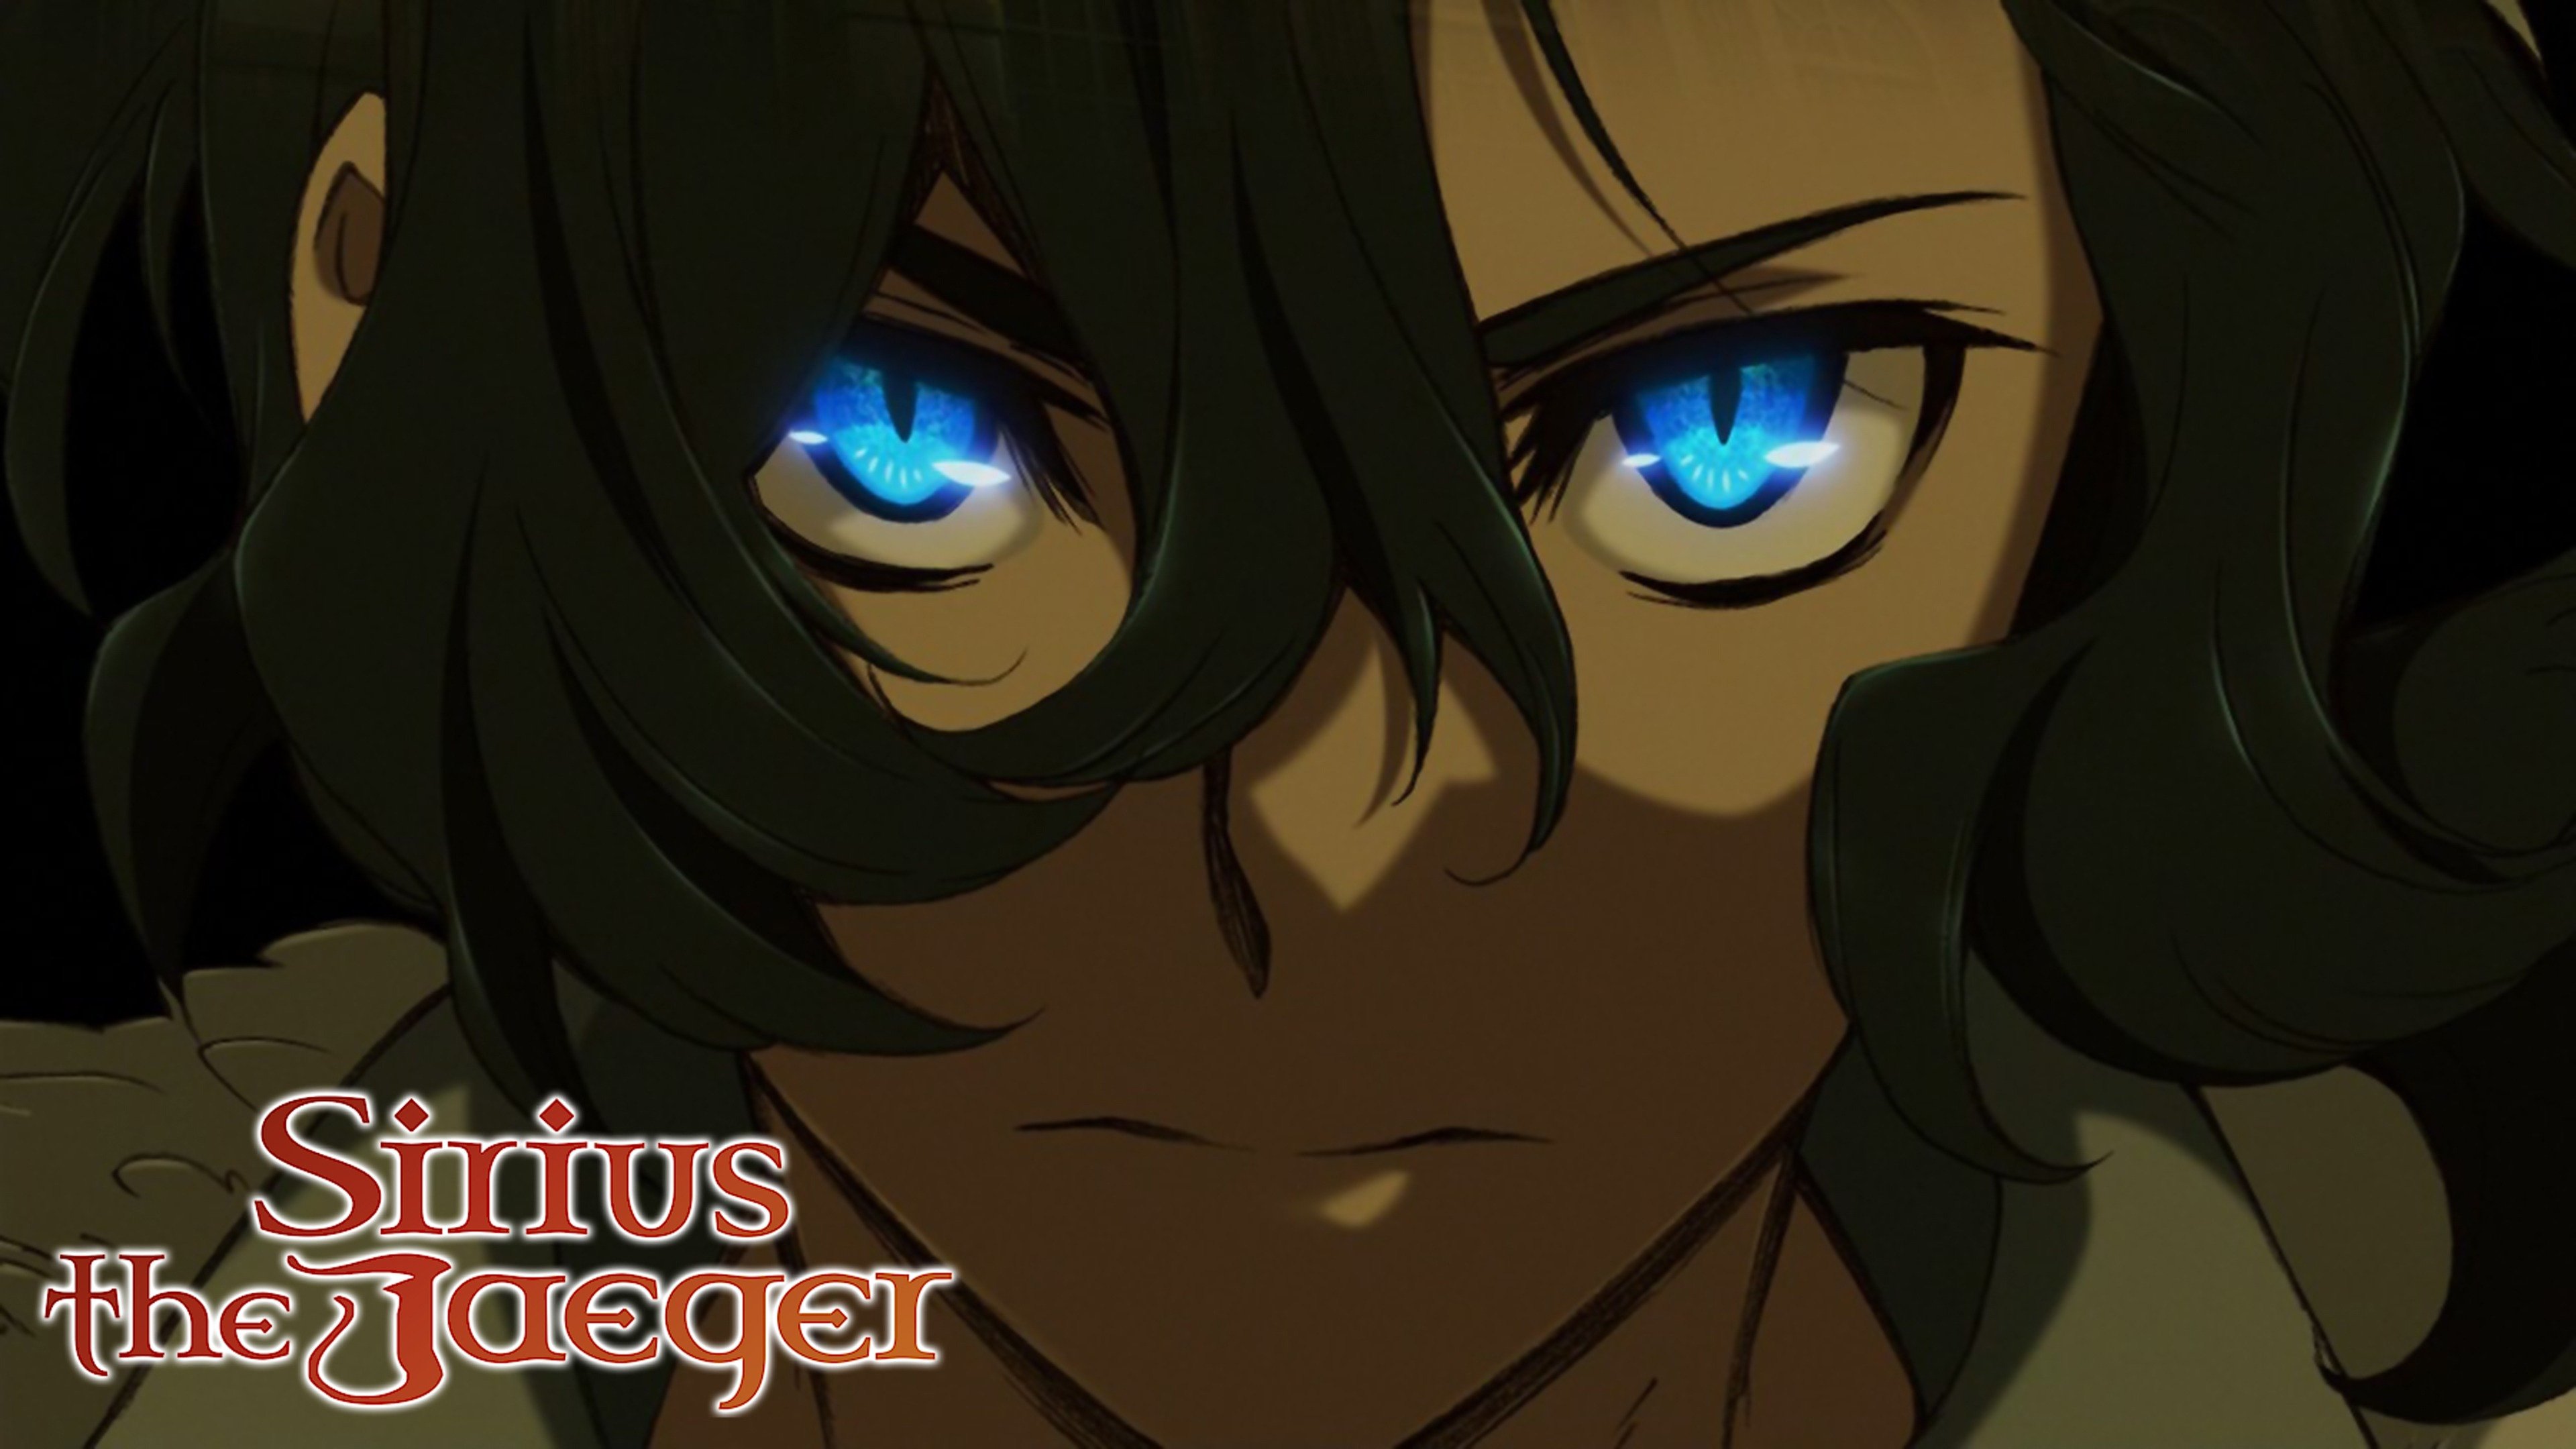 Sirius the Jaeger | Quick Anime Review - YouTube